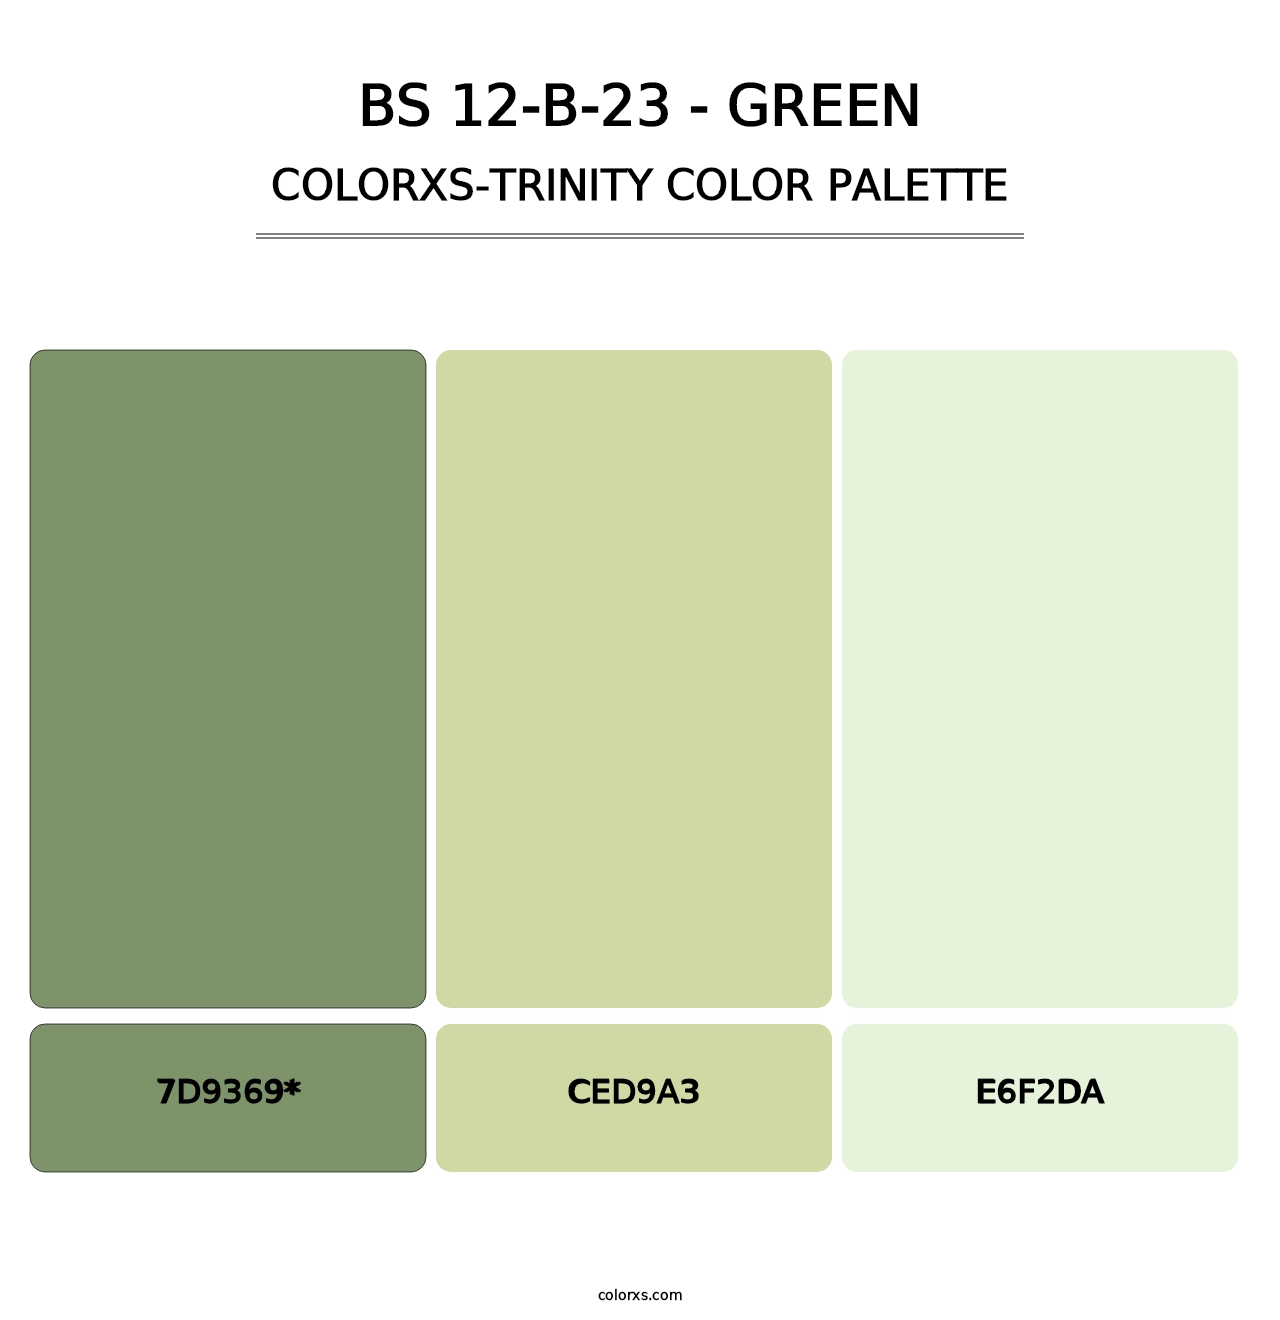 BS 12-B-23 - Green - Colorxs Trinity Palette